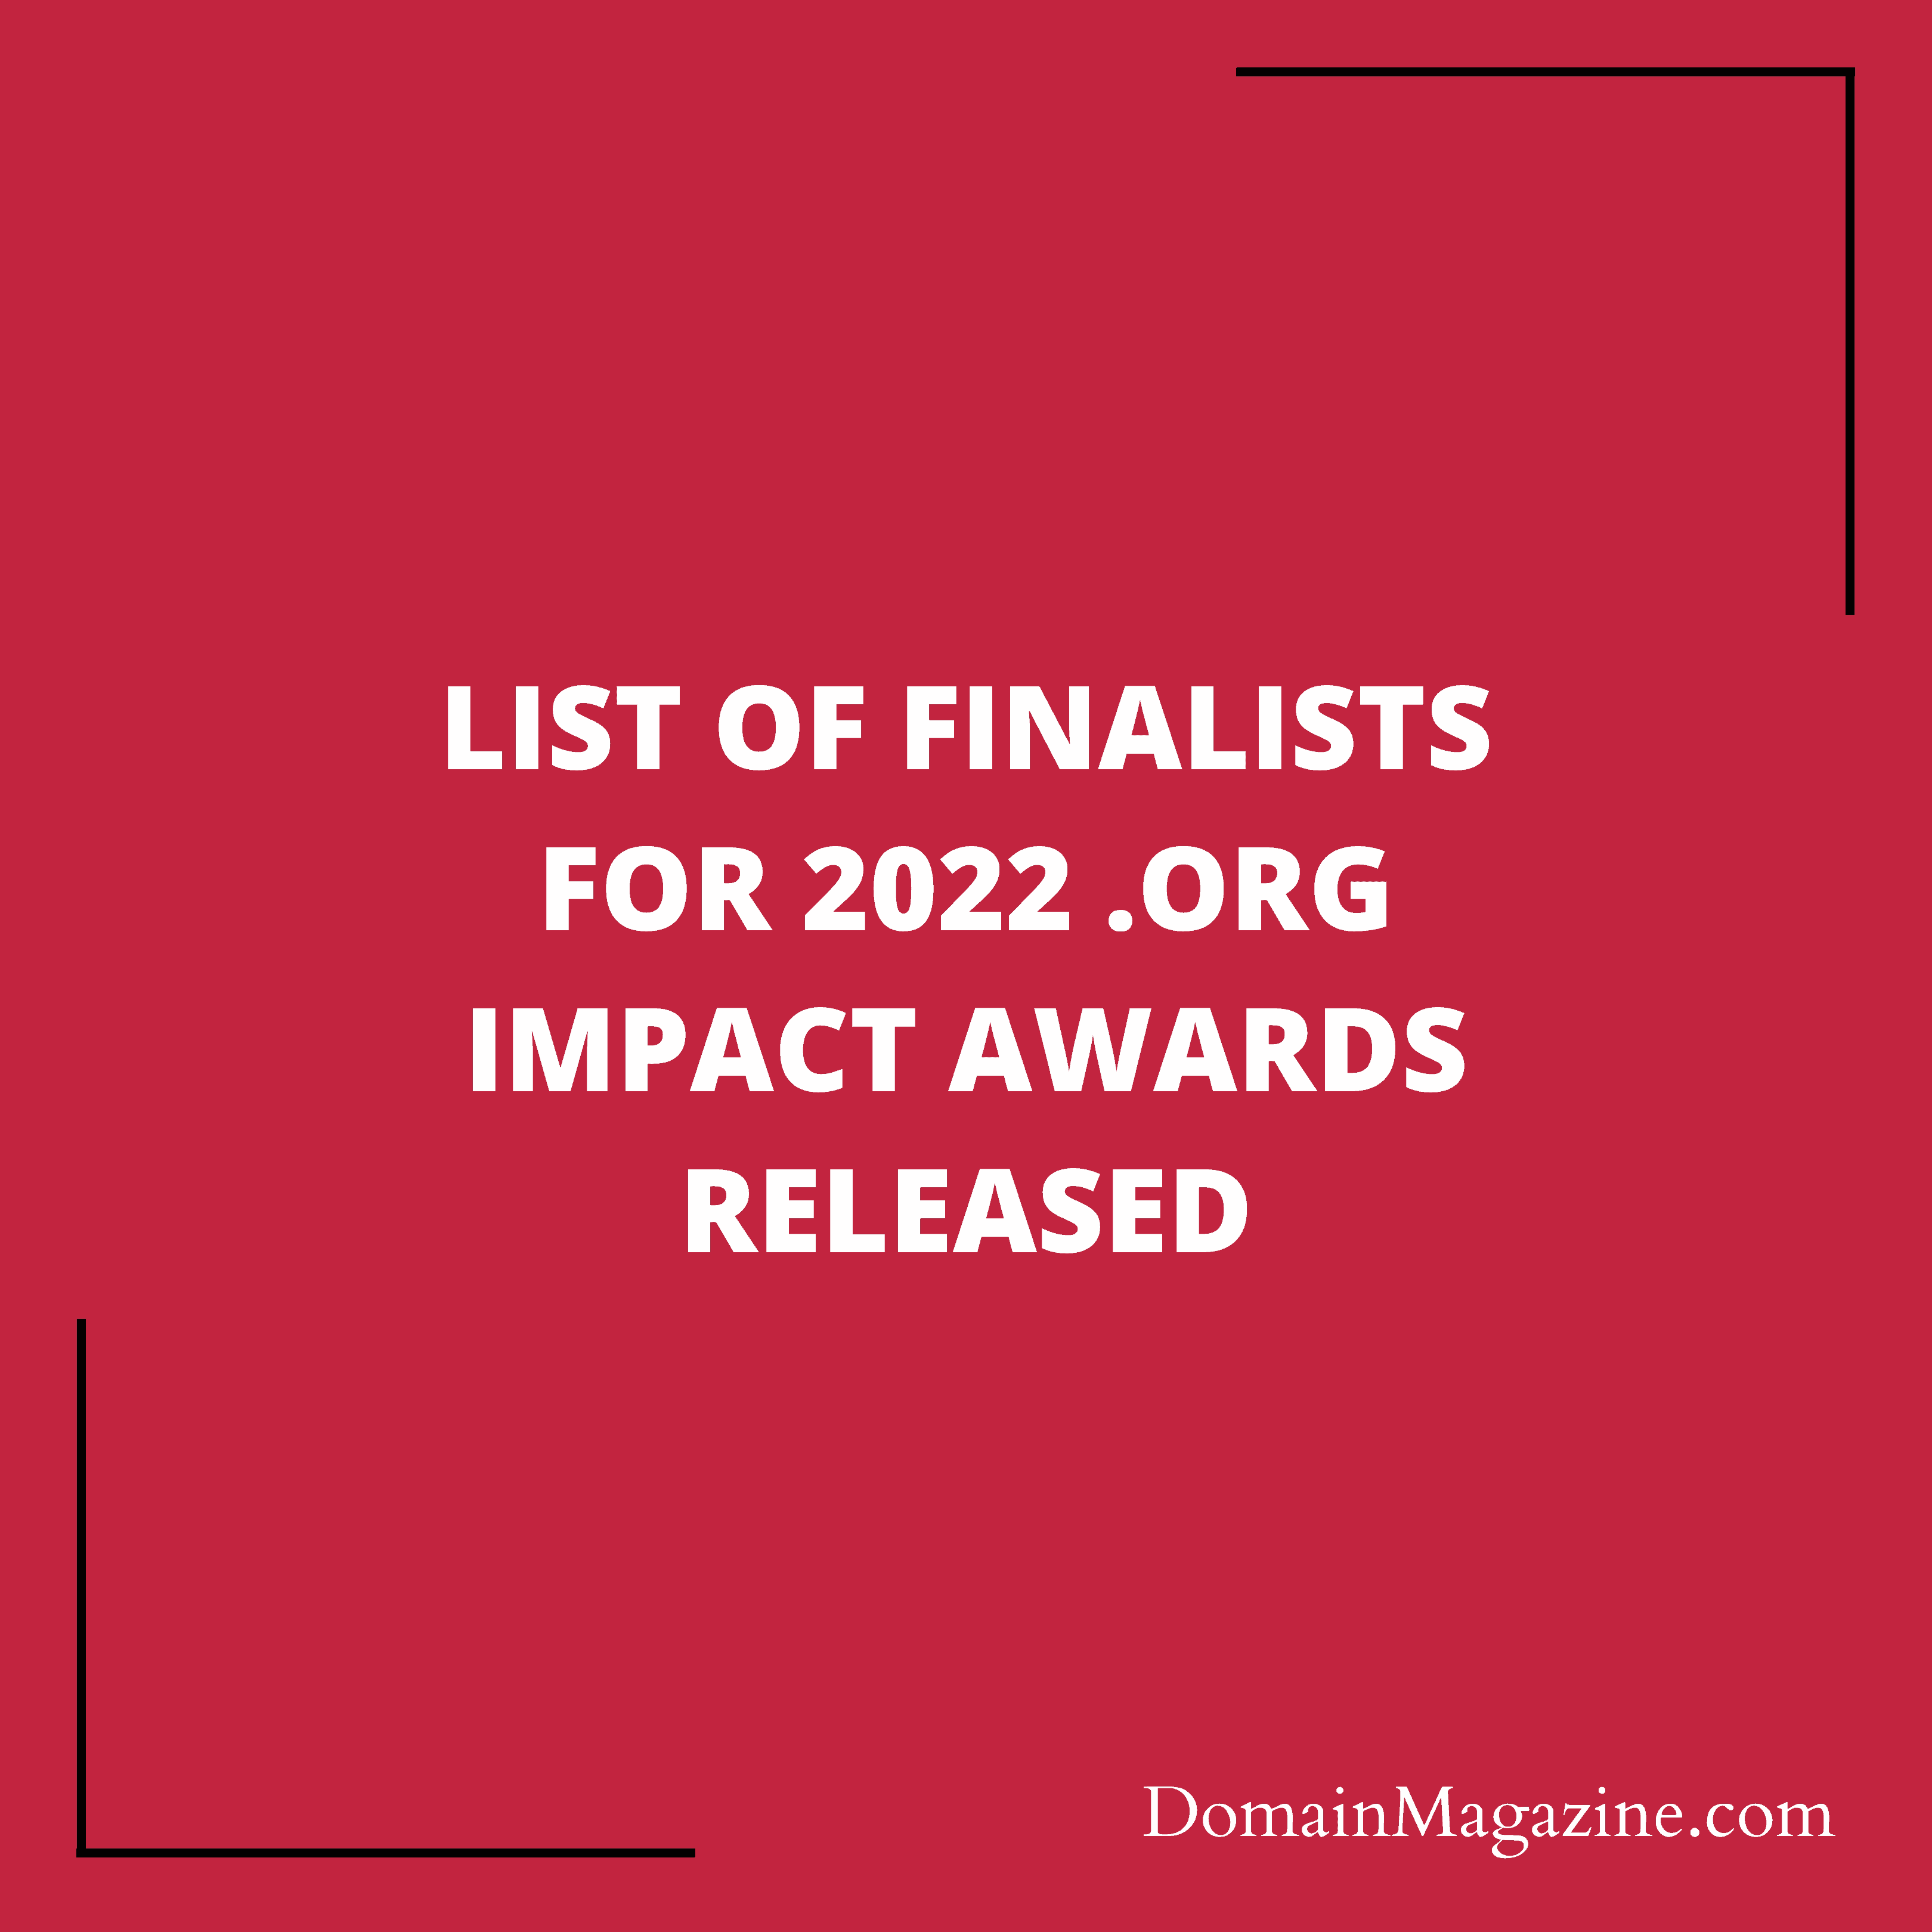 List of finalists for 2022 .ORG Impact Awards released